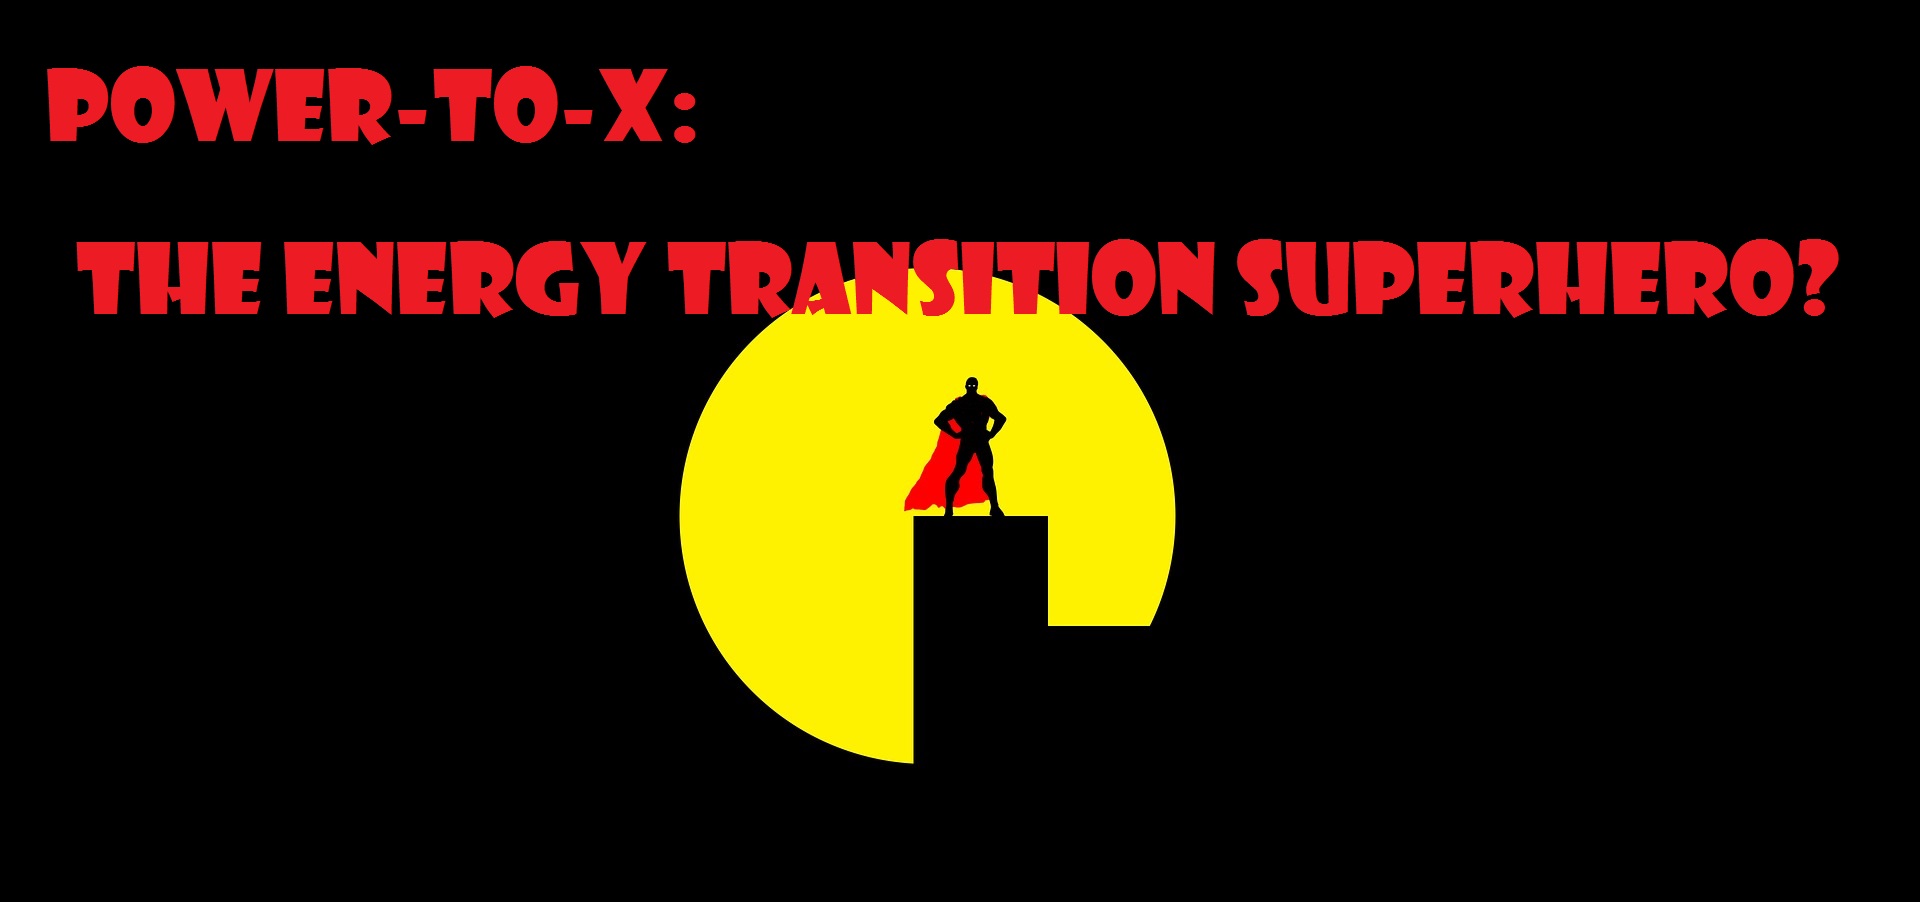 The silhouette of a superhero standing against the moon with text reading "Power to X: the energy transition superhero?"